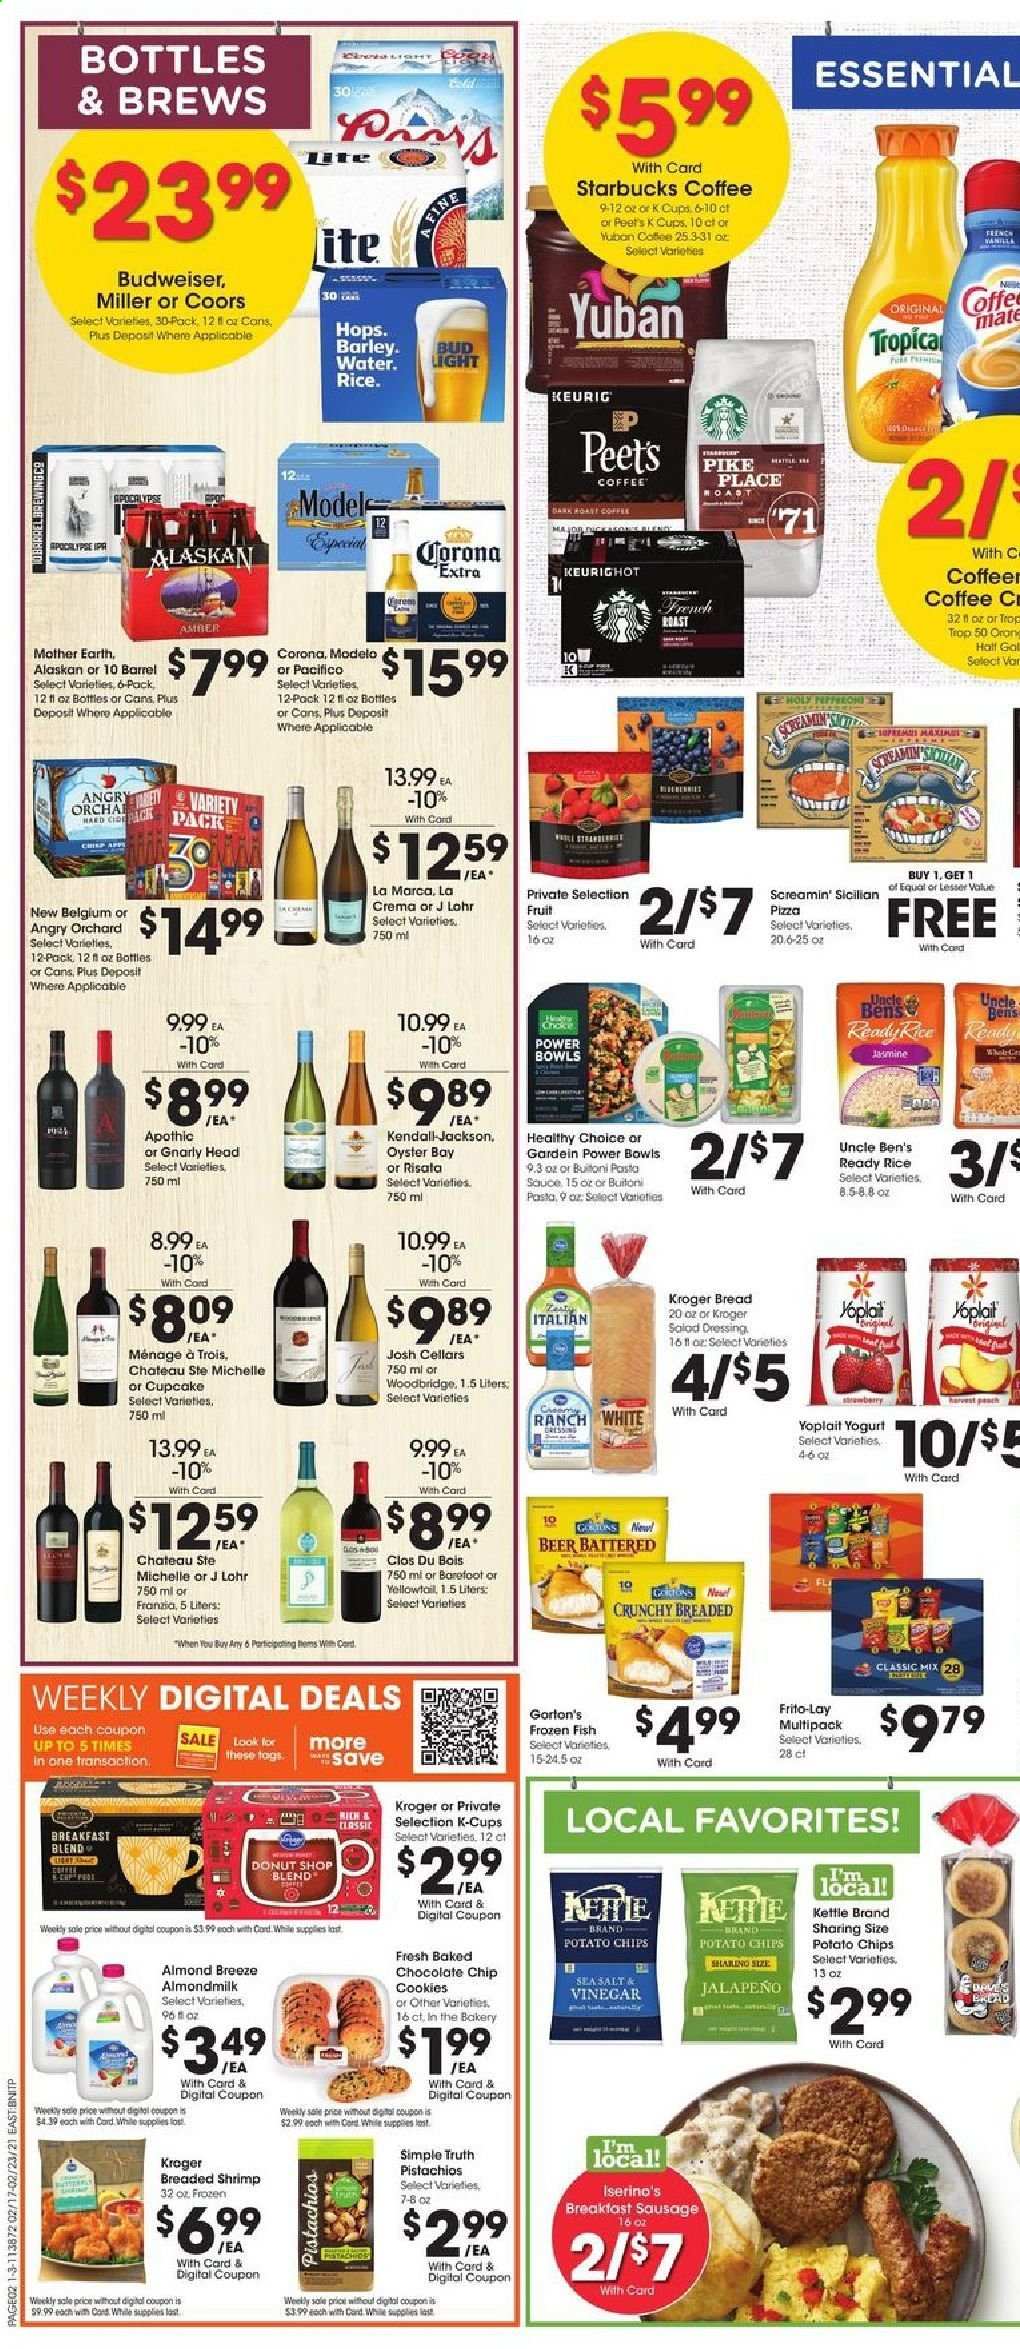 thumbnail - Fred Meyer Flyer - 02/17/2021 - 02/23/2021 - Sales products - Budweiser, Coors, bread, fish, shrimps, yellowtail, Gorton's, pizza, sauce, Healthy Choice, Buitoni, sausage, yoghurt, Yoplait, Almond Breeze, almond milk, Screamin' Sicilian, cookies, Mother Earth, potato chips, Frito-Lay, sea salt, jalapeño, Uncle Ben's, pasta sauce, dressing, pistachios, coffee, Starbucks, coffee capsules, L'Or, K-Cups, Keurig, Woodbridge, beer, Bud Light, Corona Extra, Miller, Modelo. Page 2.